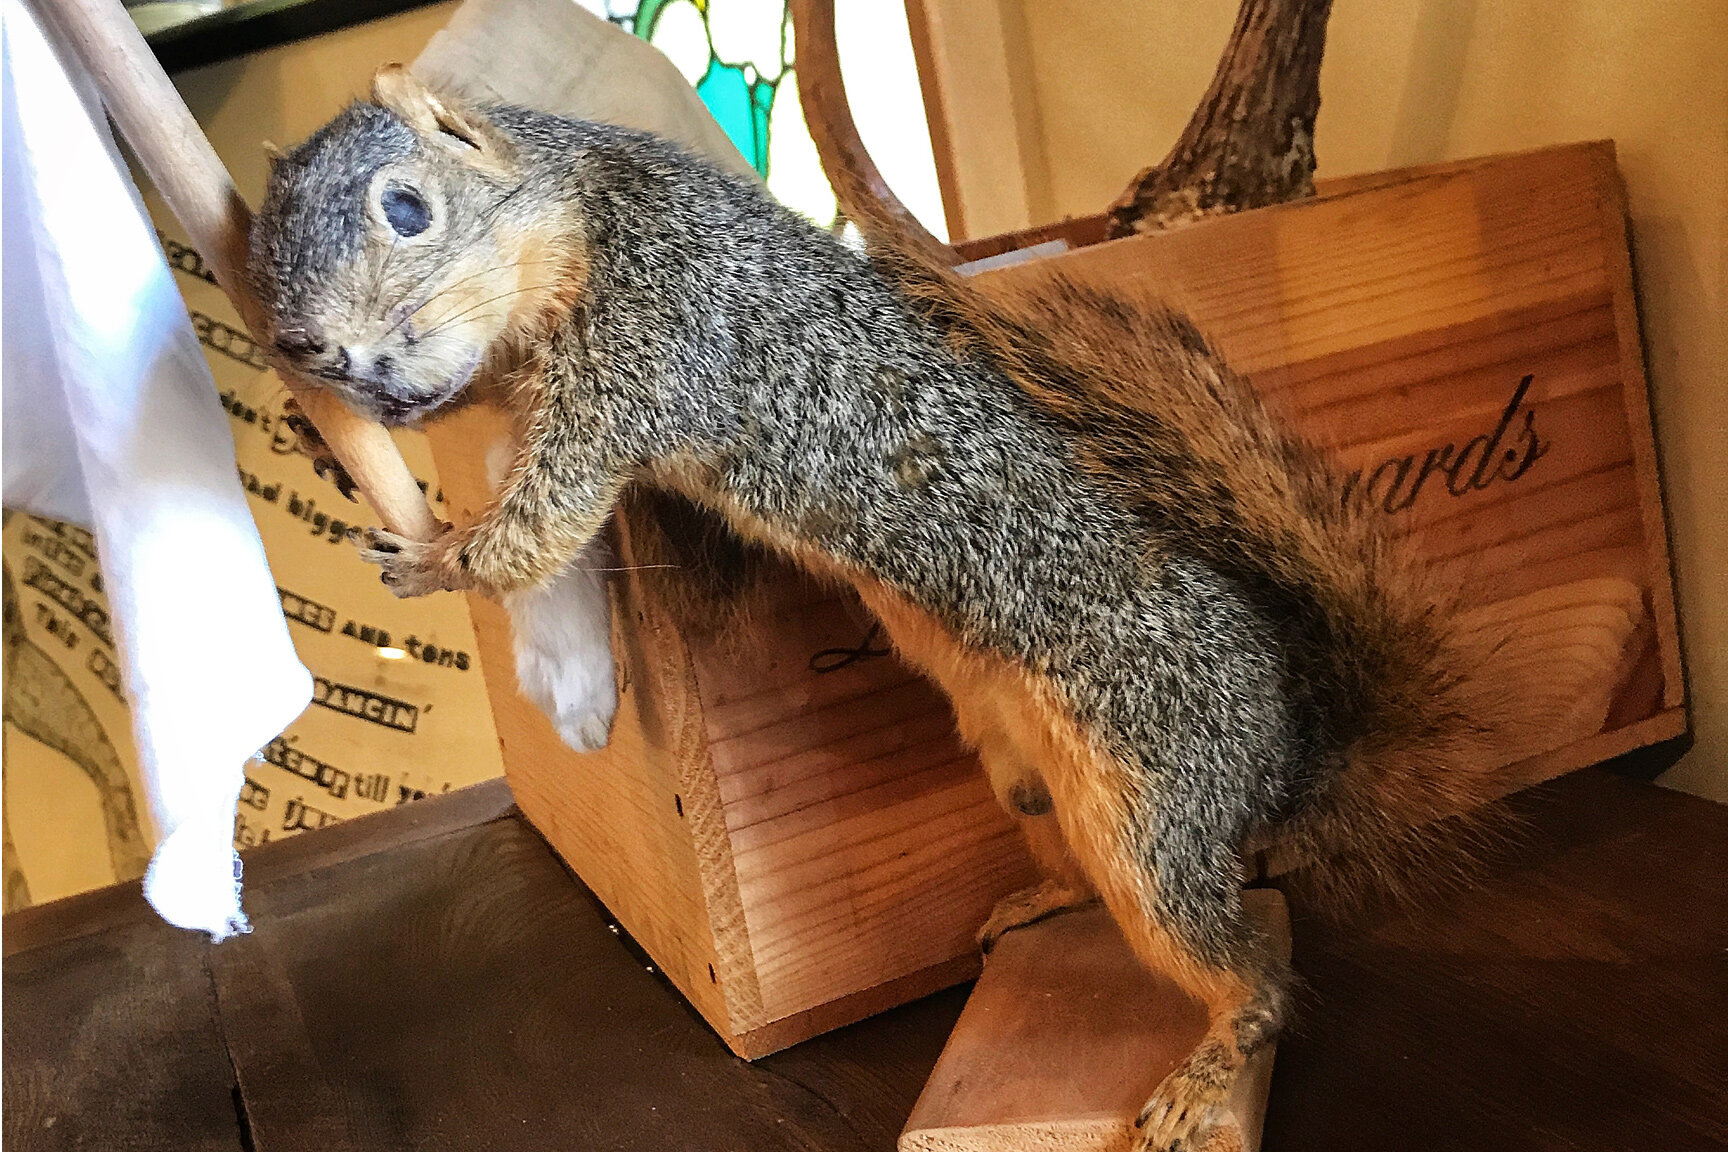   Squirrels and Unruh were enemies. This squirrel was a tribute to those that surrendered!  